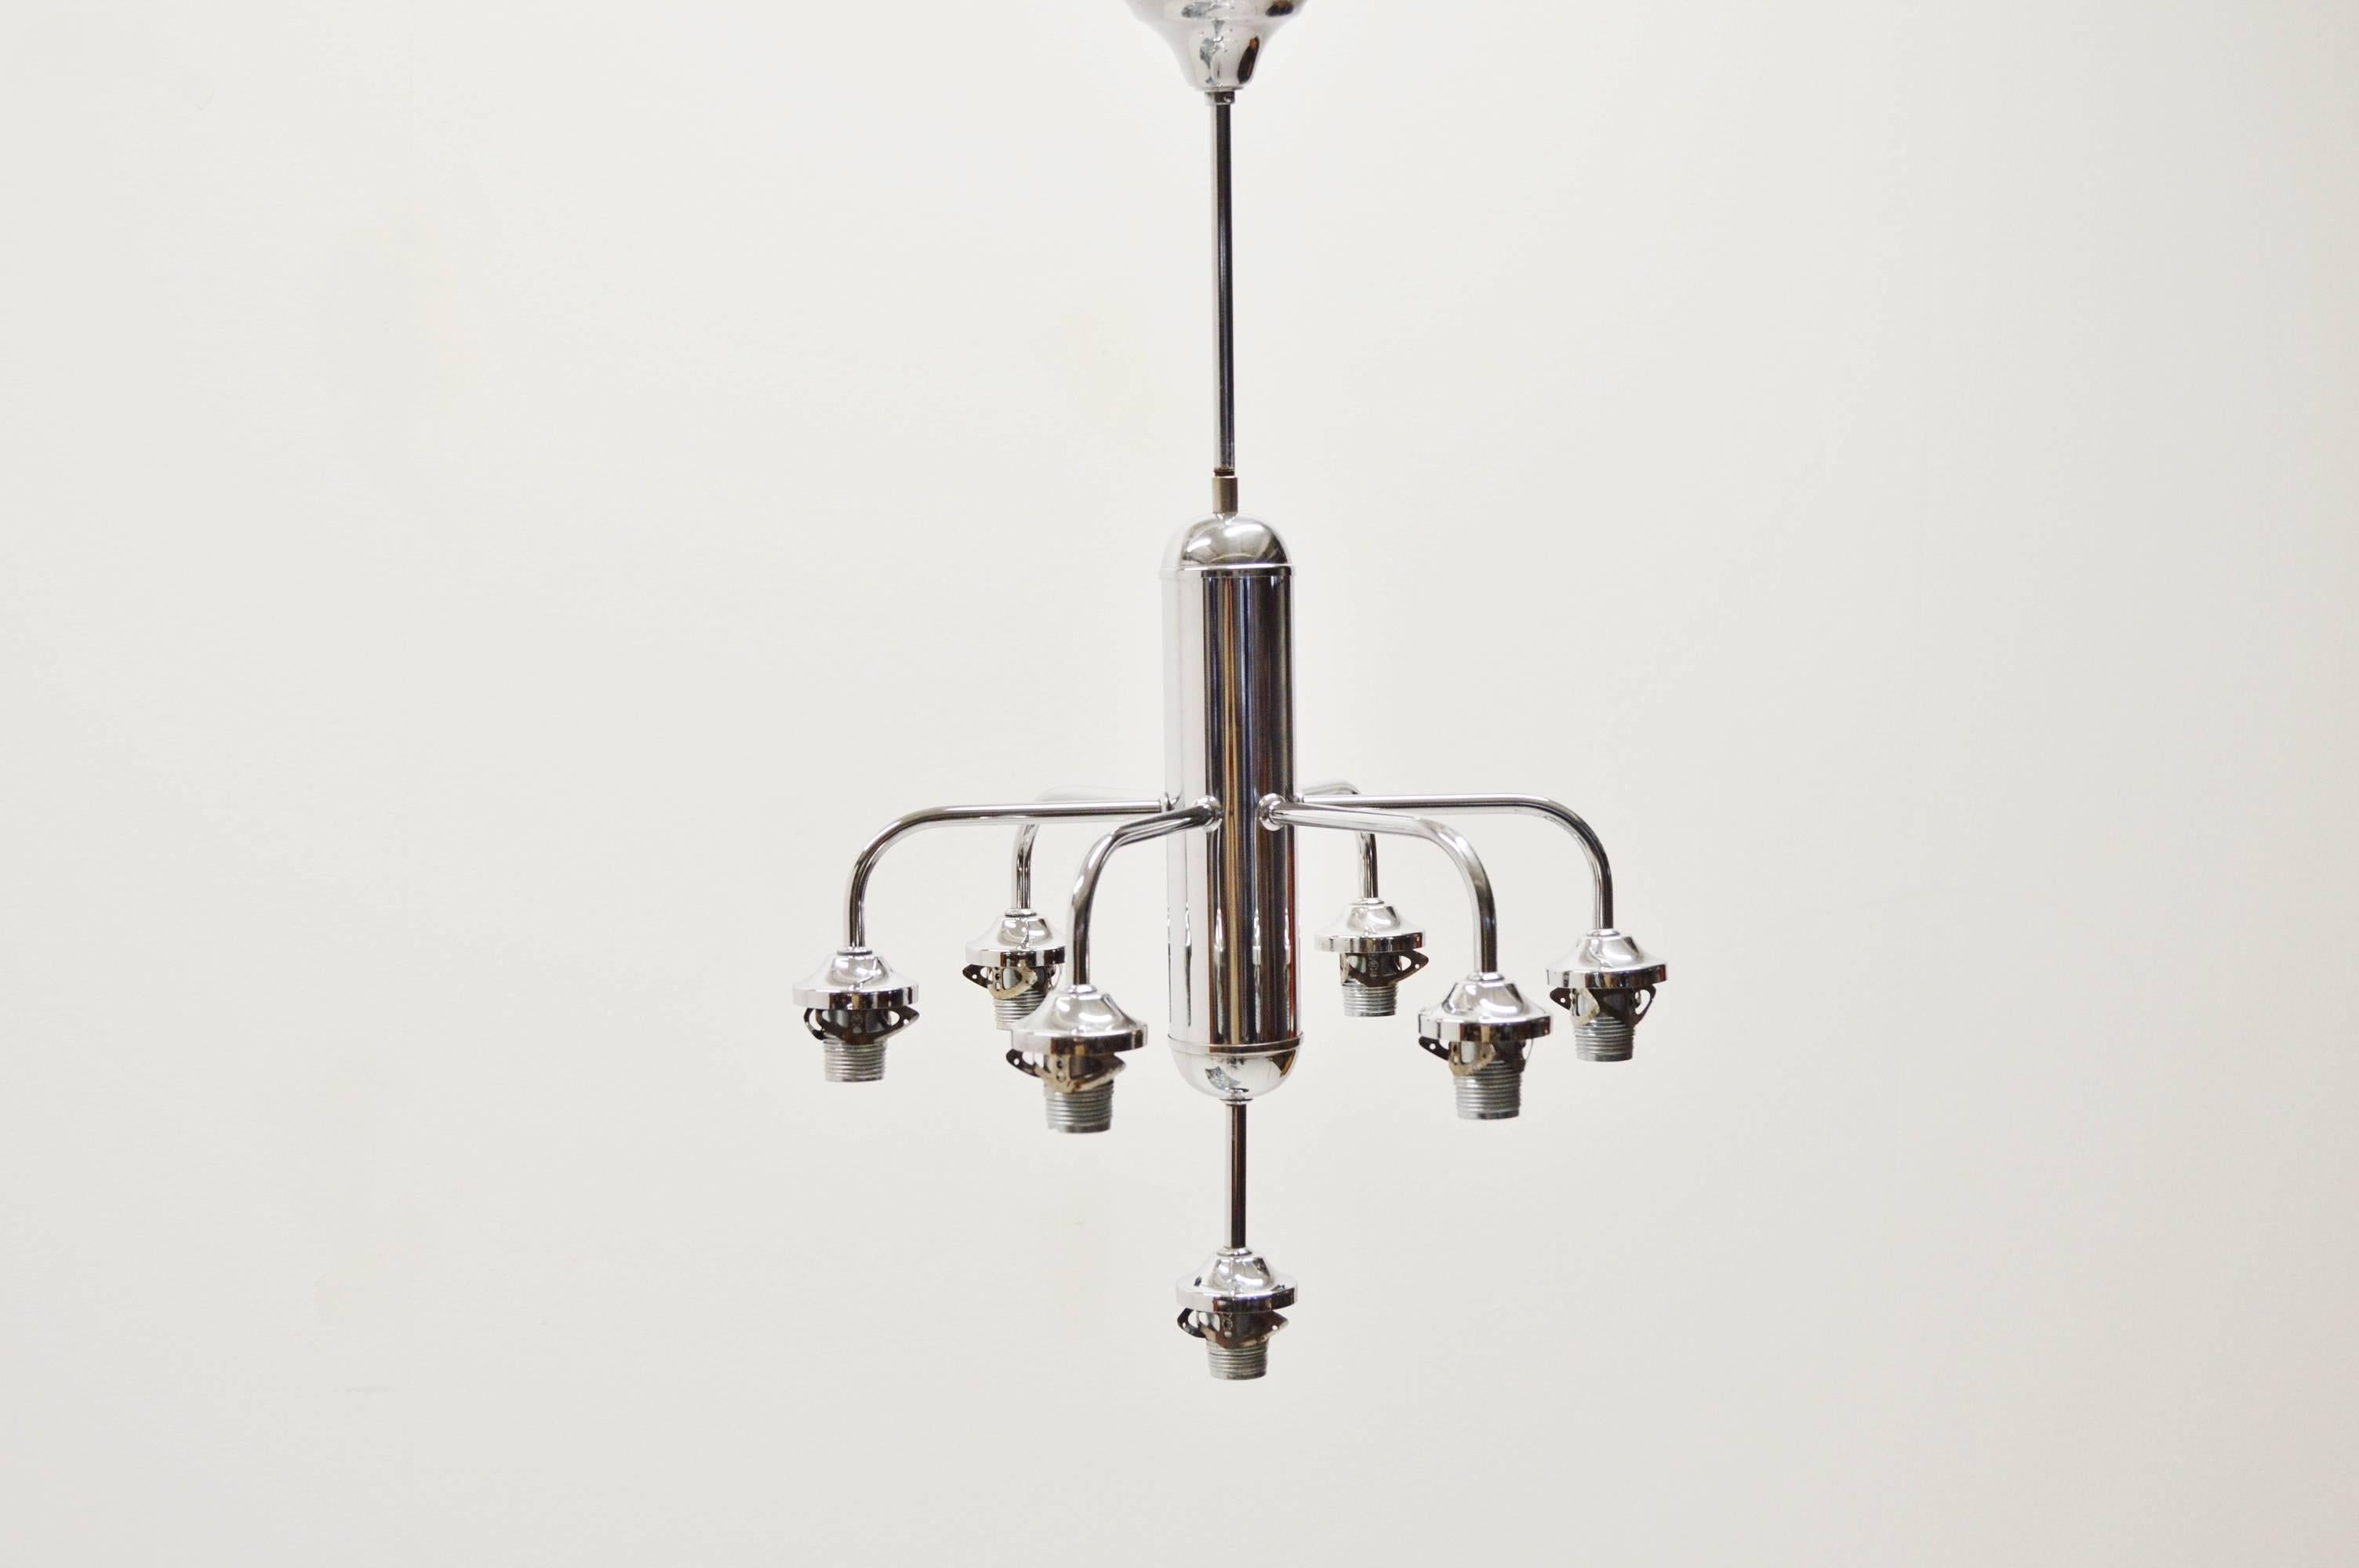 Metal Seven-Arm Art Deco Ceiling Lamp in Chrome and Glass